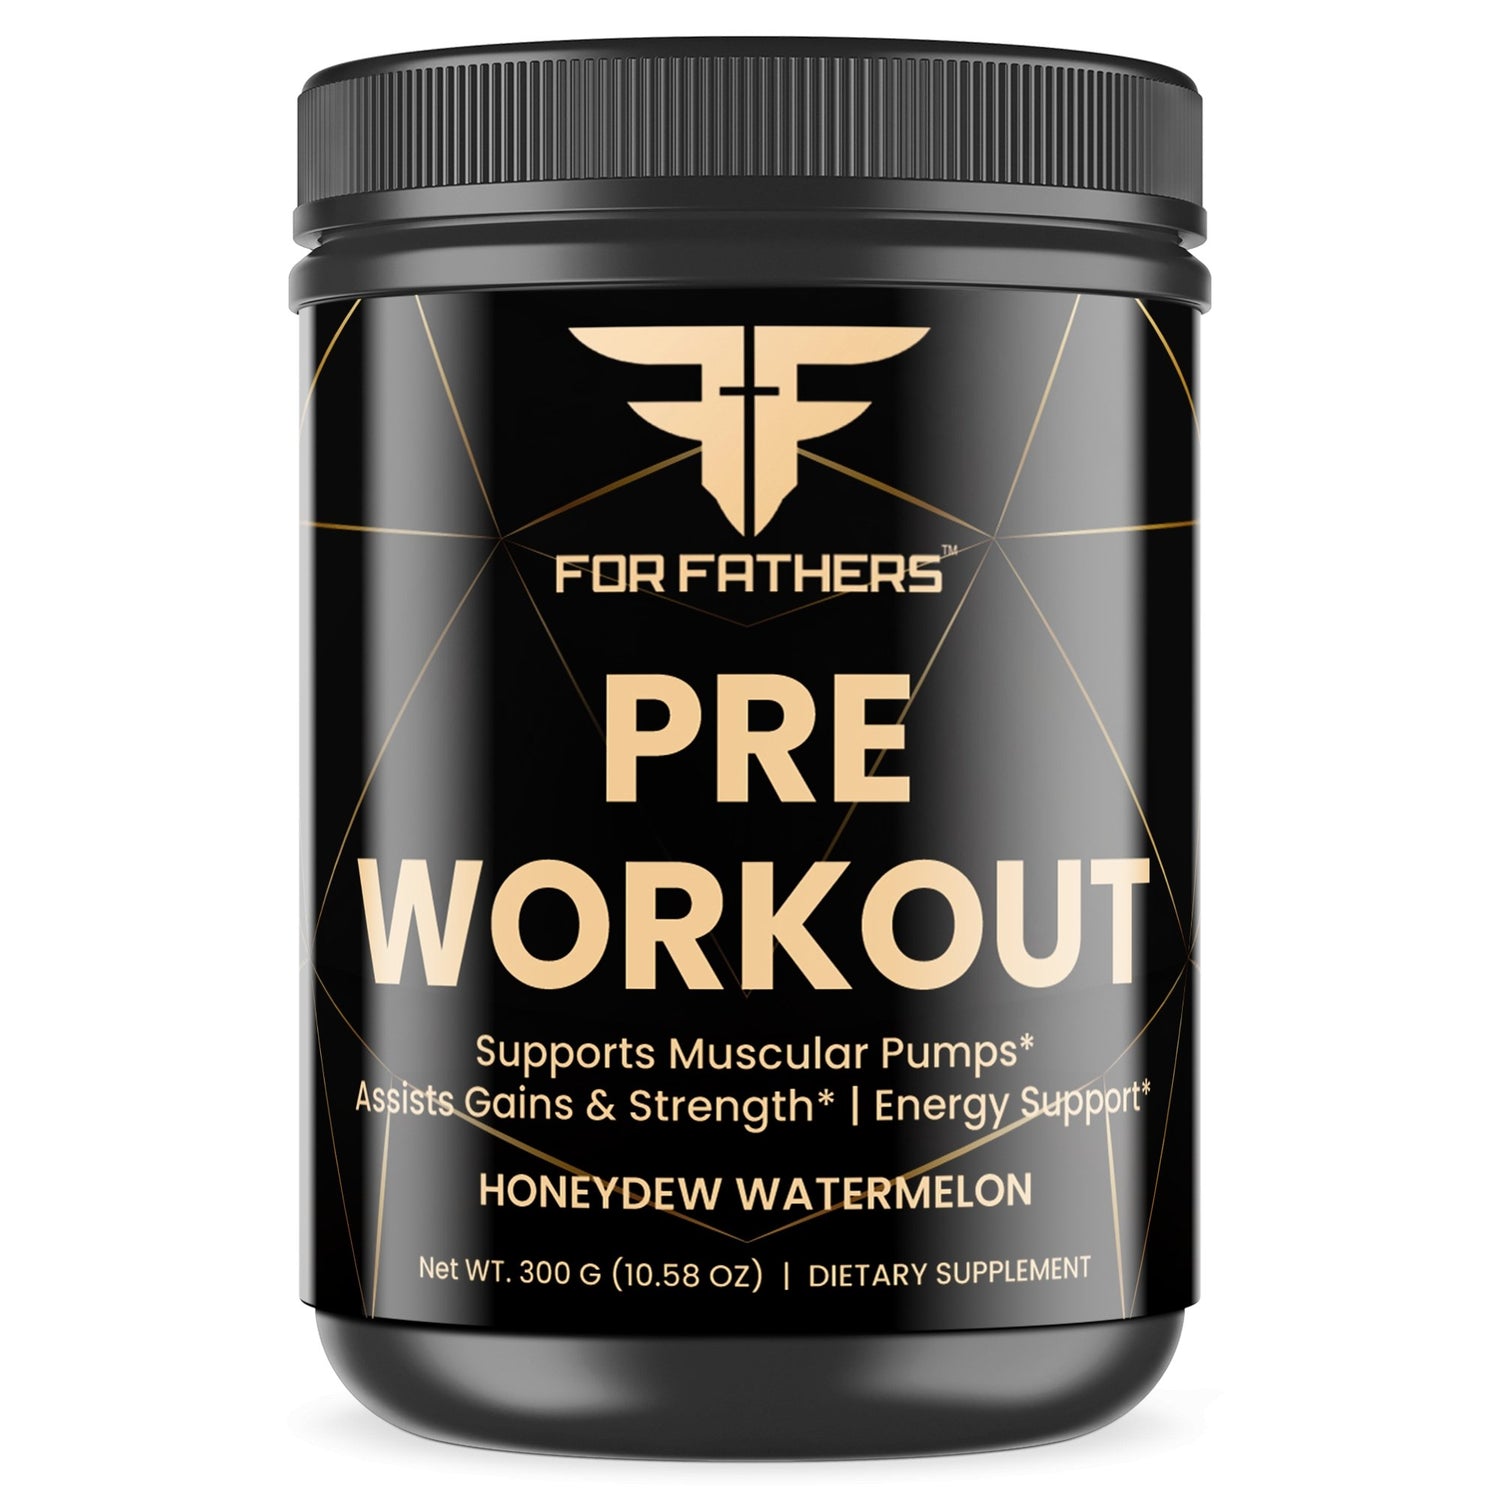 PRE-WORKOUT WATERMELON - For Fathers Fitness